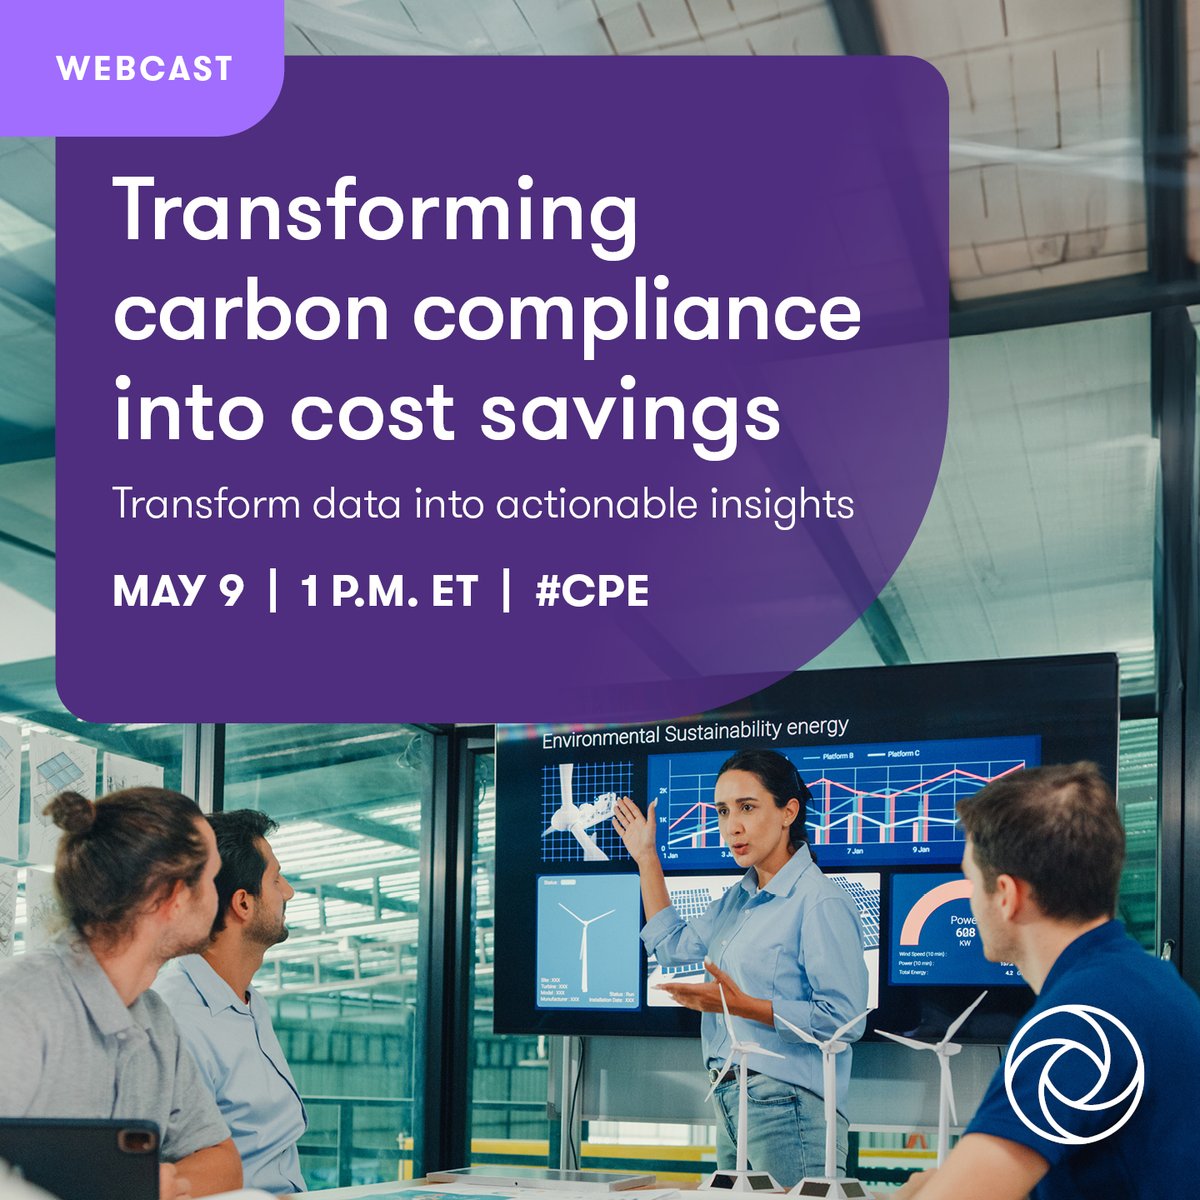 #Manufacturers face challenges in gathering, consolidating and interpreting energy usage and power generation data. Sign up for our #webcast on May 9th about unlocking insights into energy consumption, emissions and savings opportunities. gt-us.co/3UB7OuI #CPE #webinar